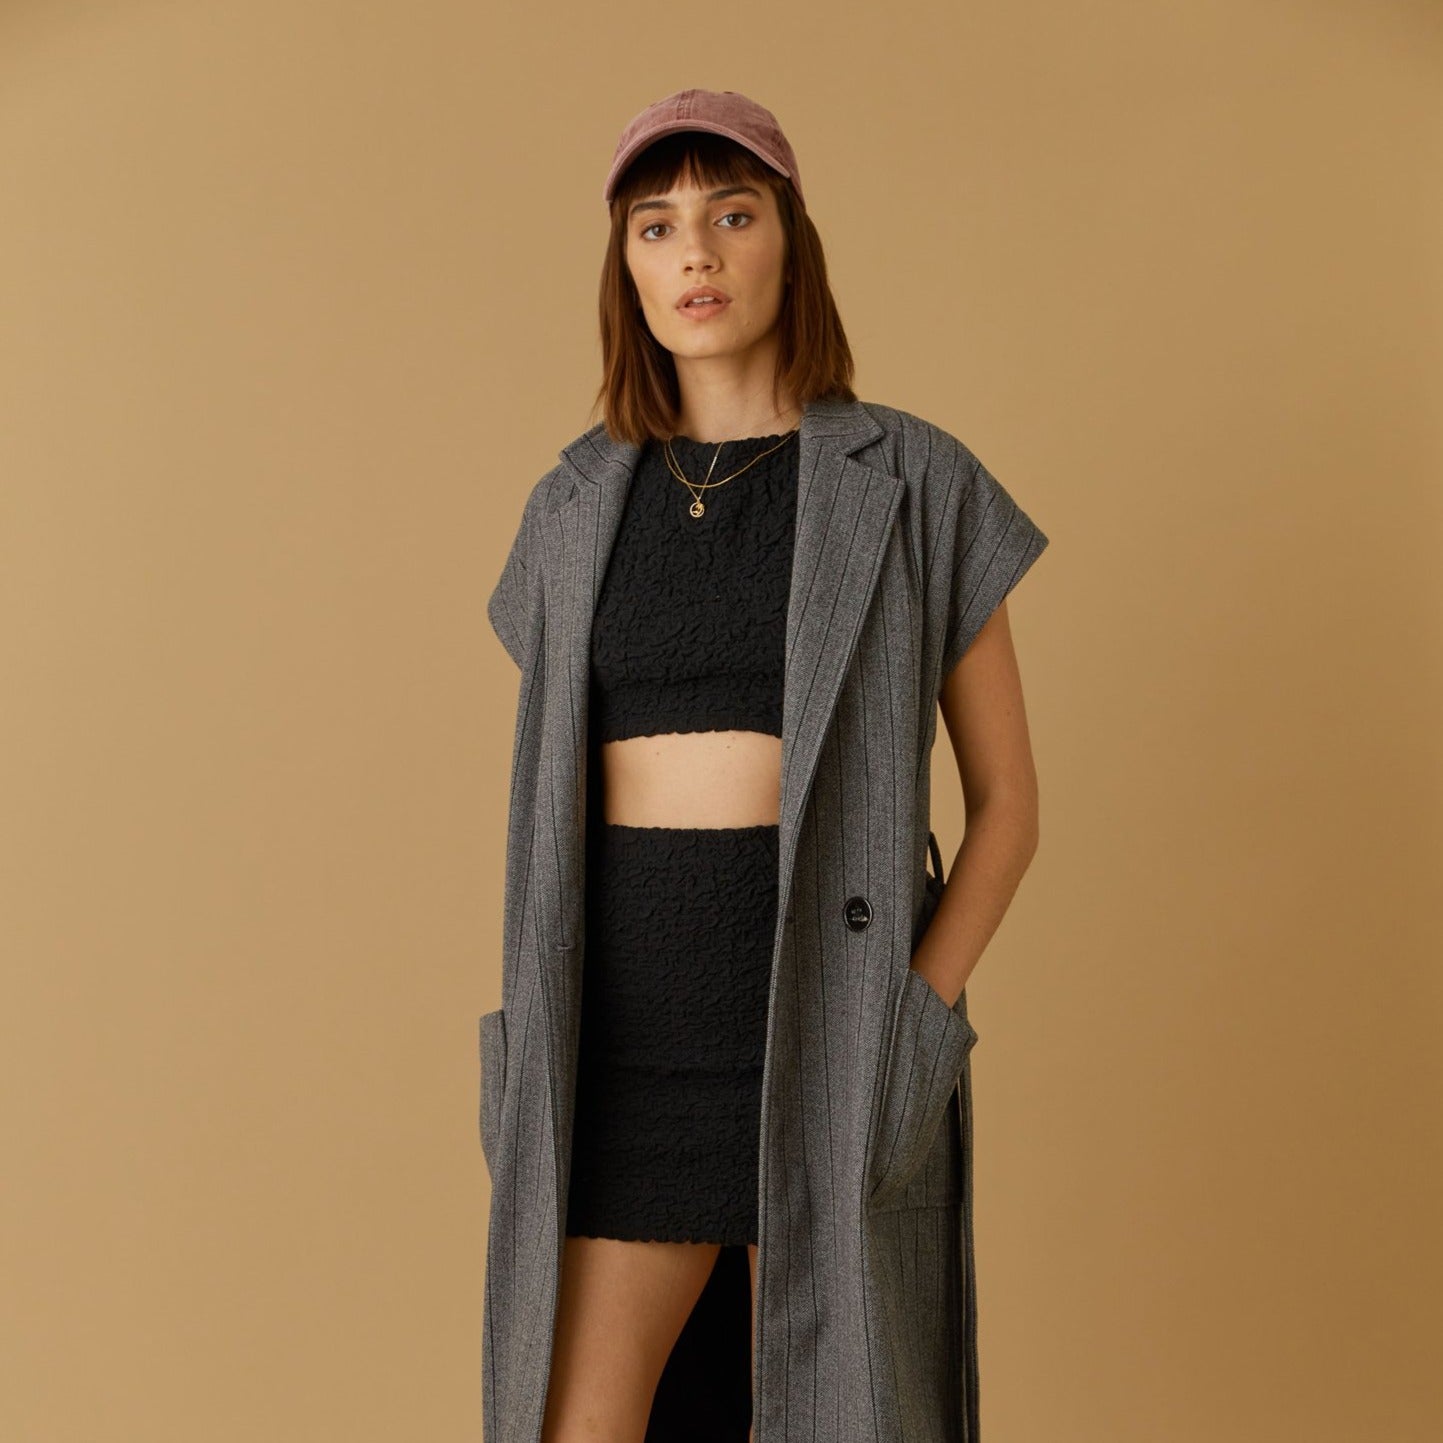 Collared Sleeveless Coat Double Breasted